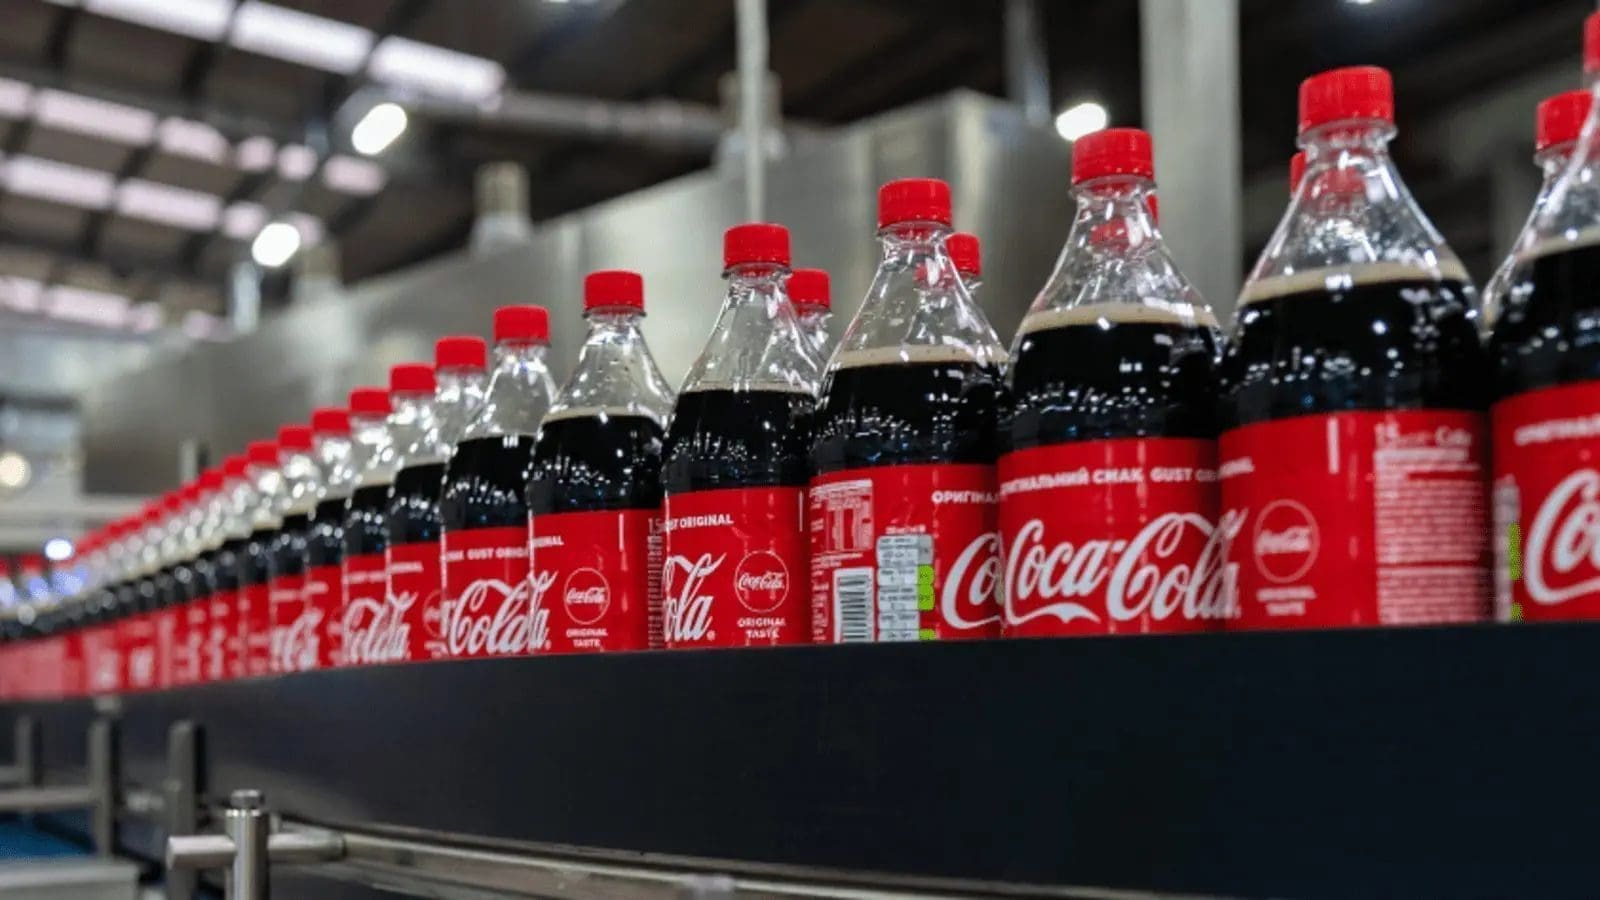 Coca-Cola Company reiterates plans to list African bottling unit CCBA “once market conditions become more favorable”